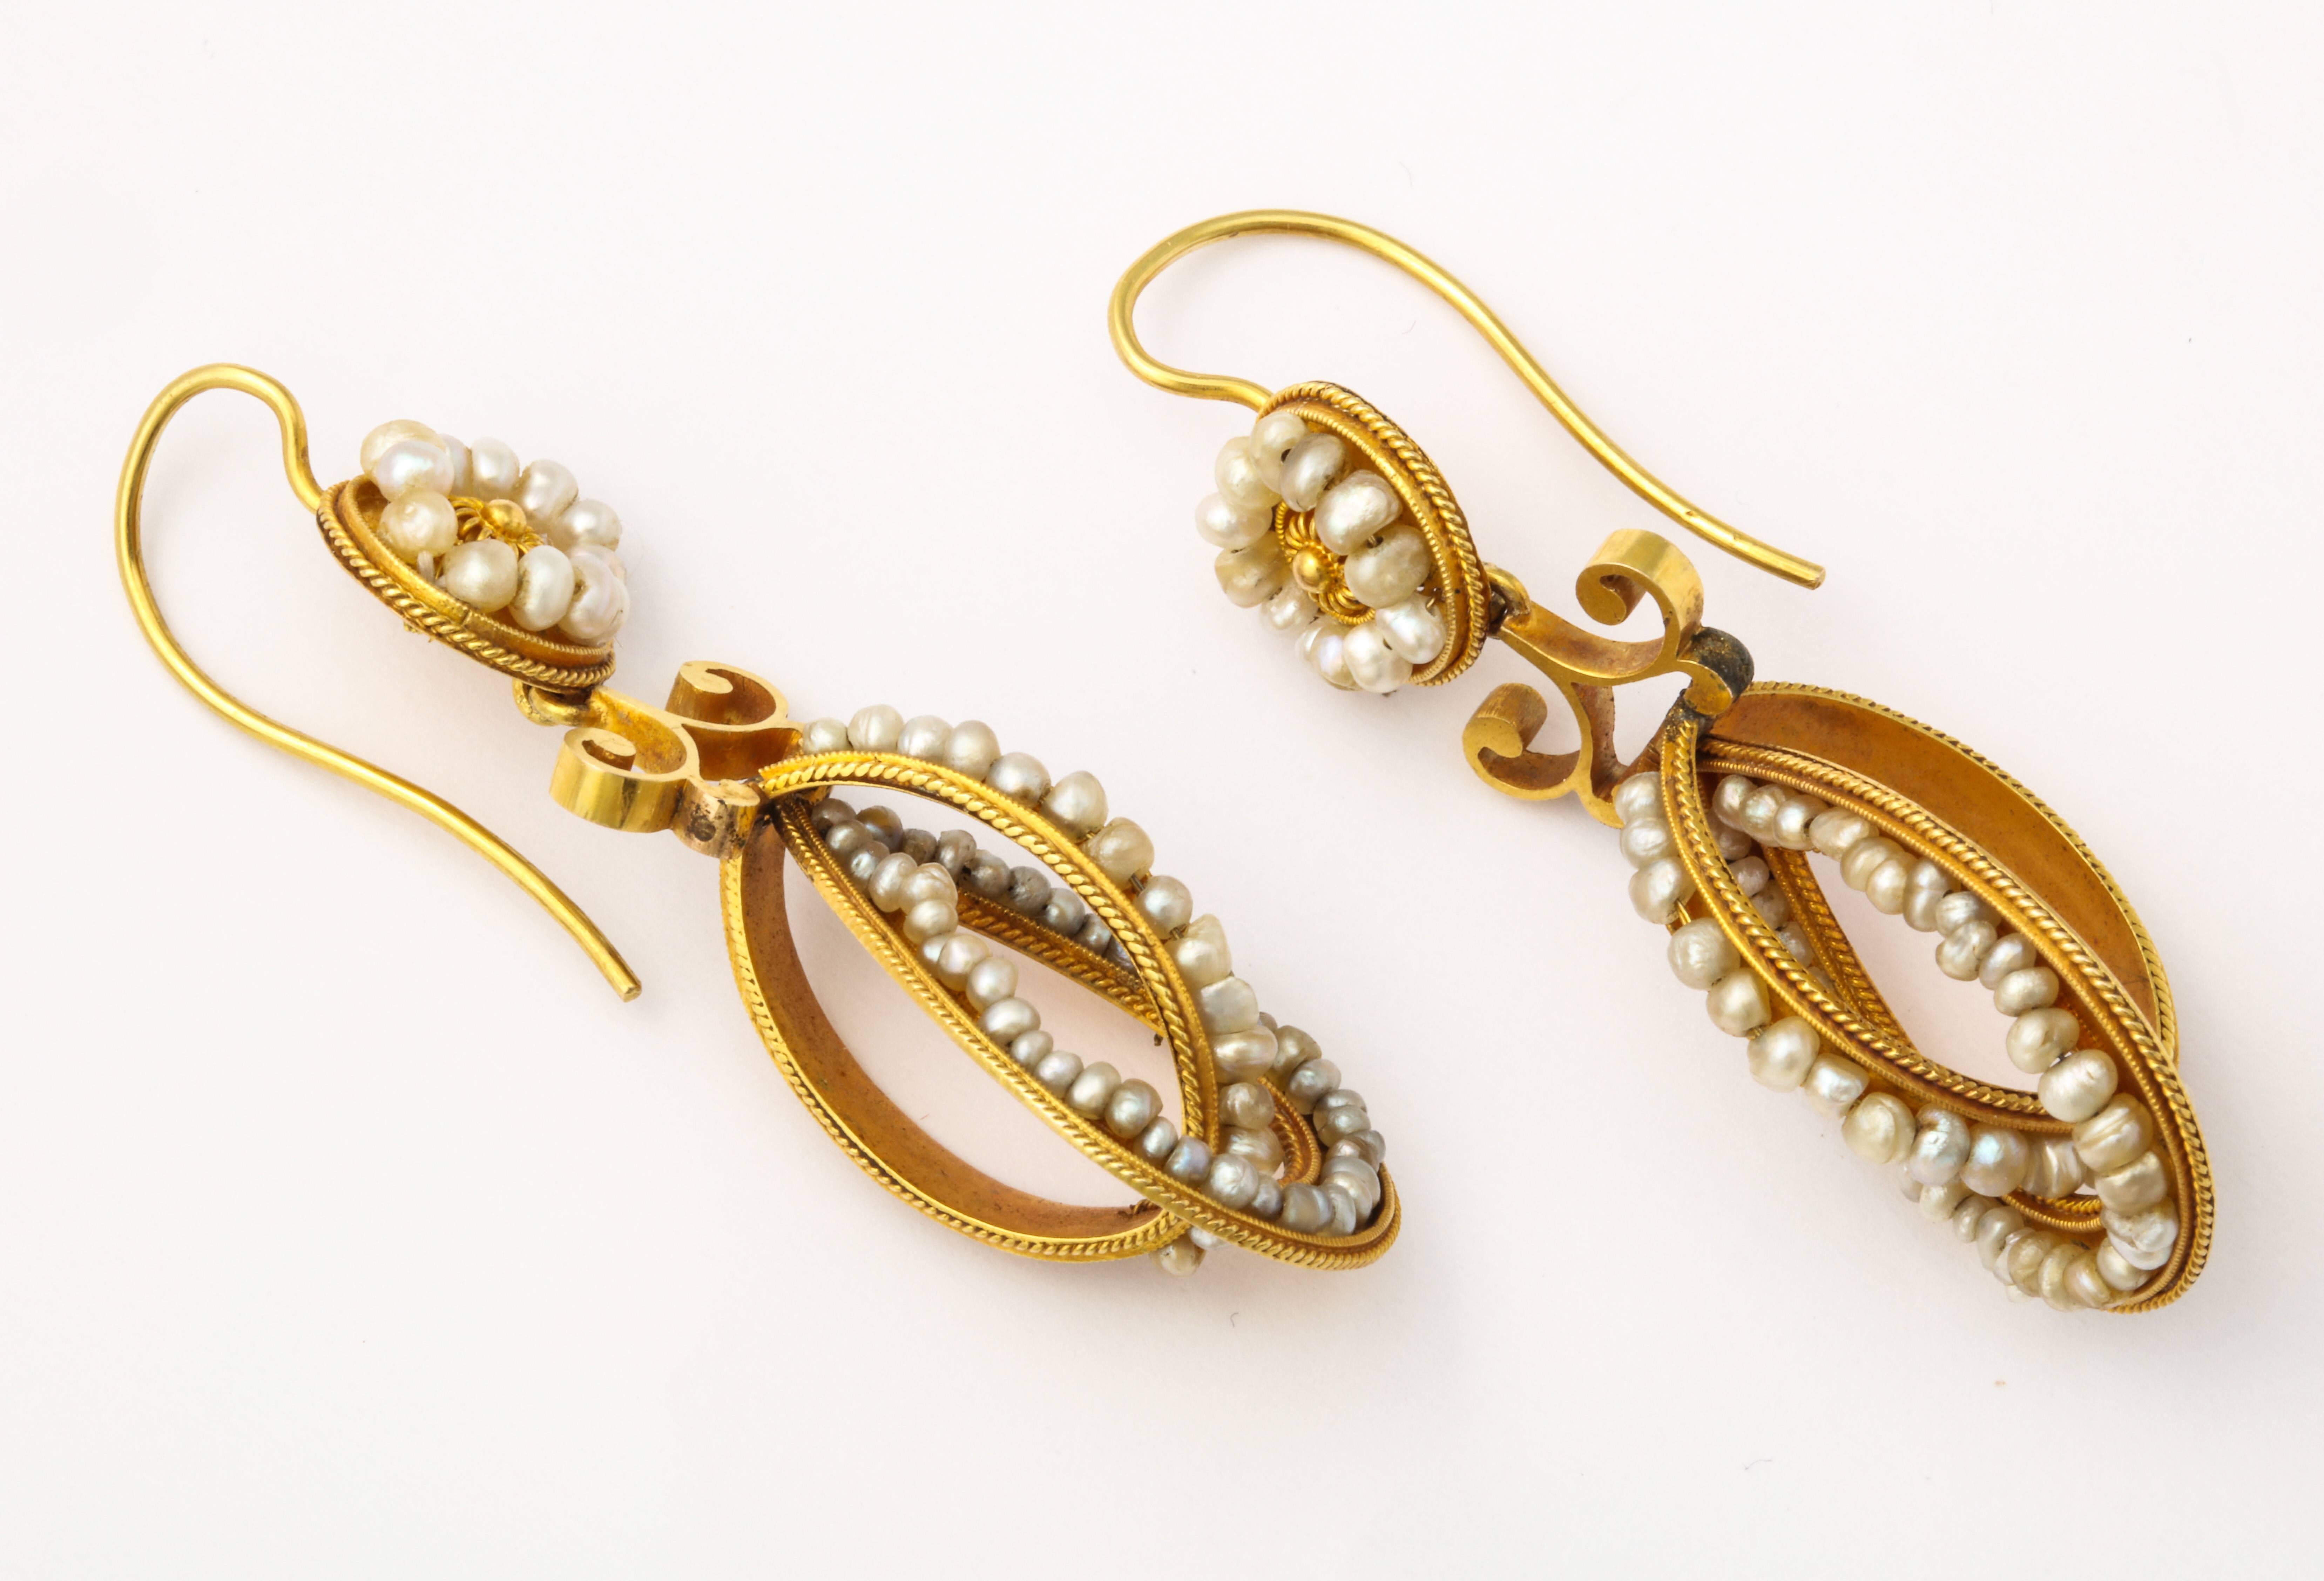 Light on the ear, seed pearls line opposing ovals of 14kt or 15kt gold as they drop below a flower form just below the lobe. Unquestionably an unique and romantic Victorian look, the earrings are European c. 1860. Condition is fine. Measurements 2